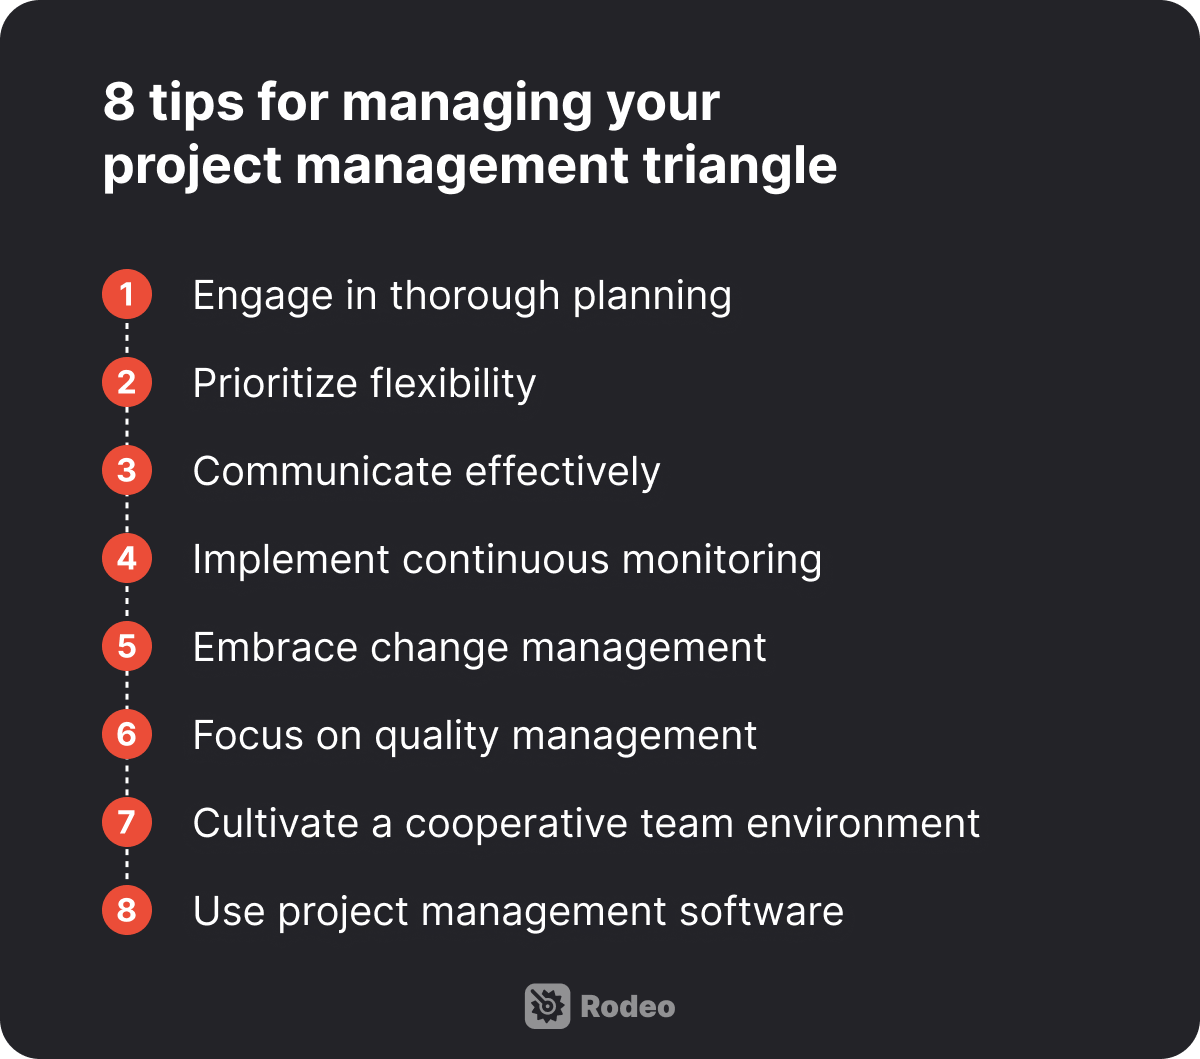 Illustration of 8 tips for balancing project management triangle